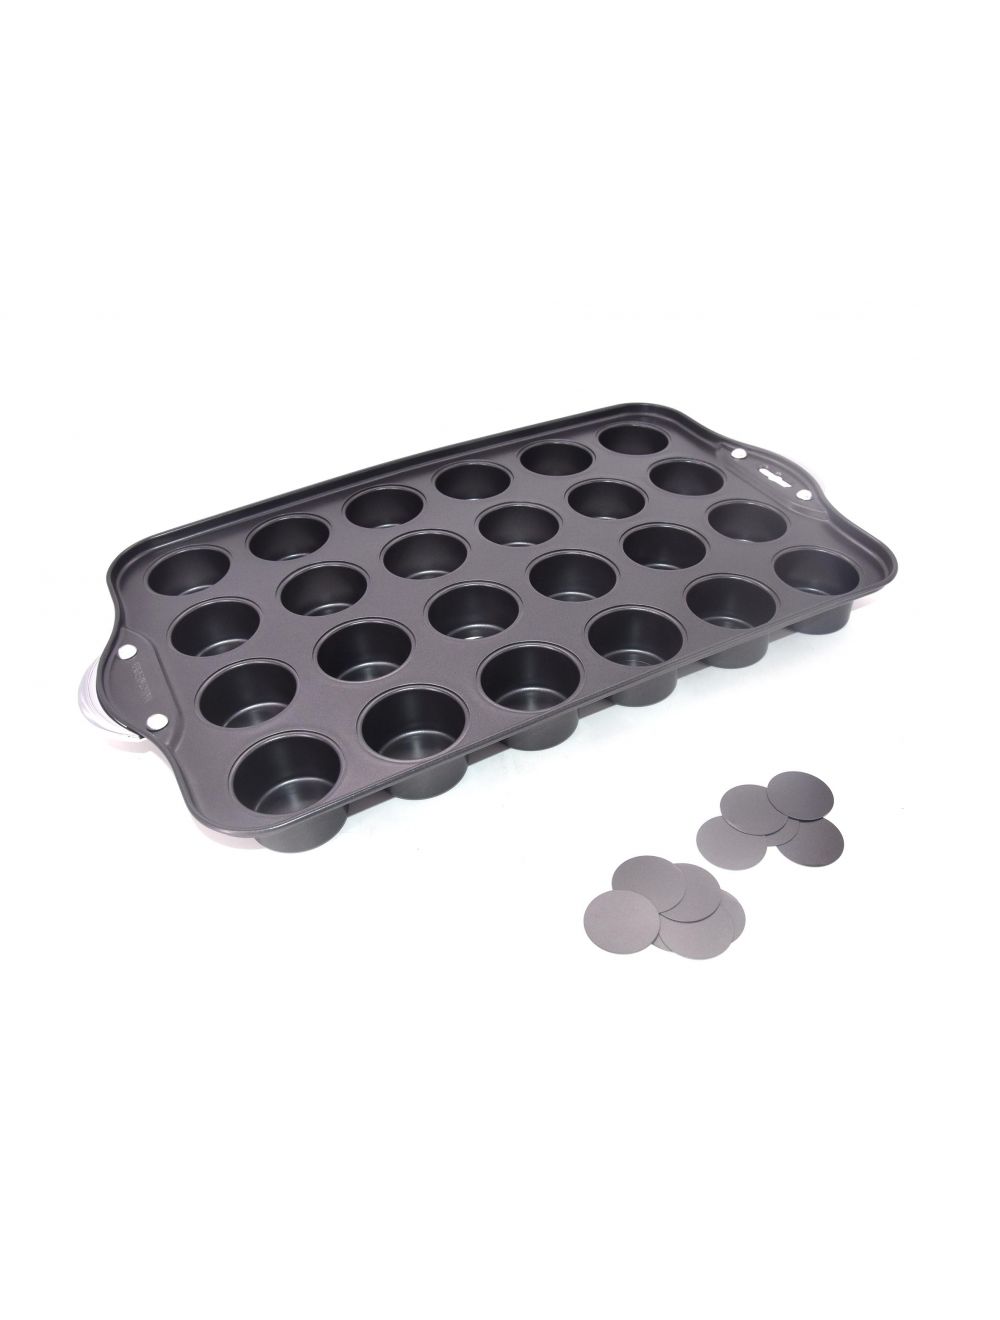 Muffin Pan 24 Cup Division 48.5x27x4.5cm